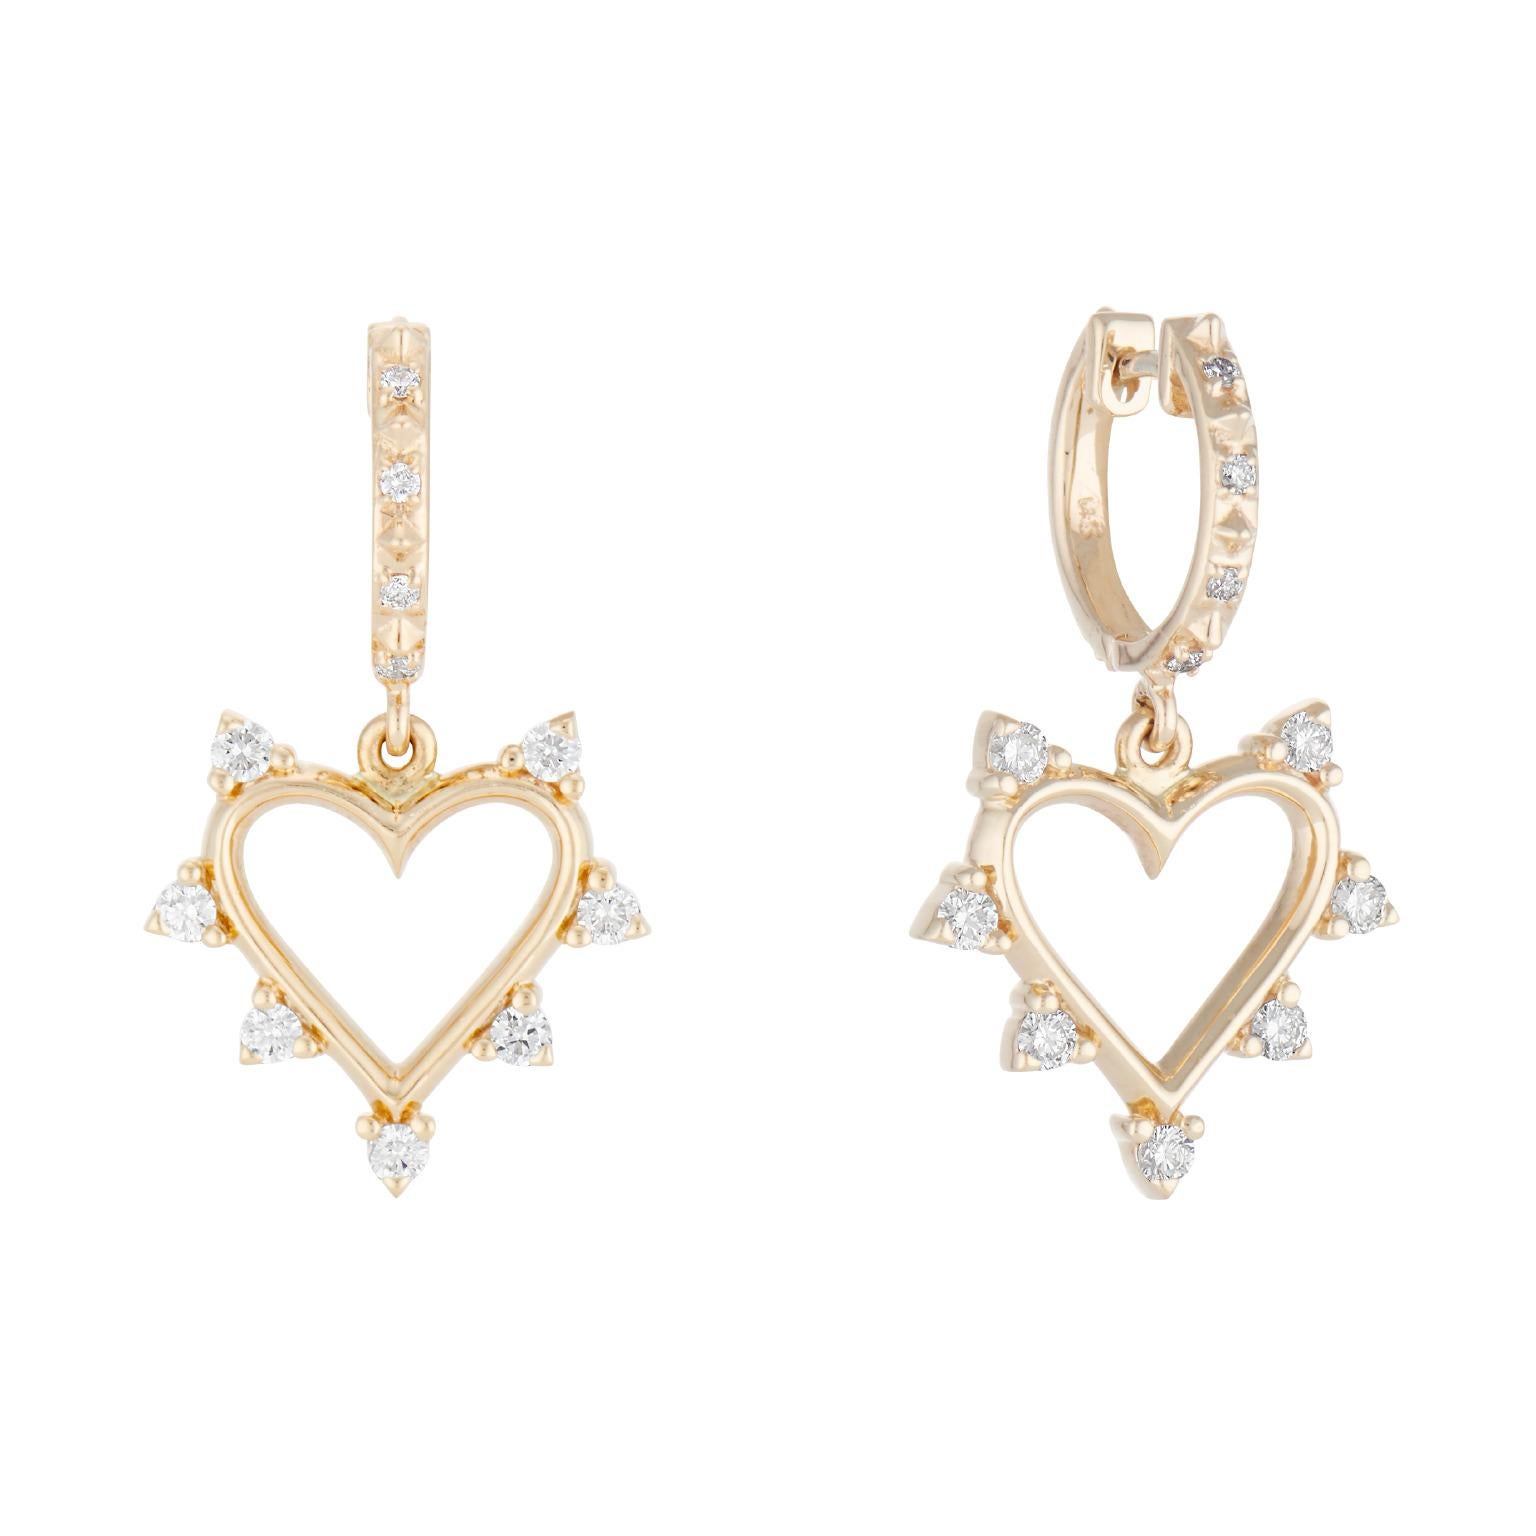 These Marlo Laz Open Heart Hoop Earrings serve as a reminder to approach everything with an open heart, open soul, and open mind. These romantic 14 Karat yellow gold love earrings feature a spiked border of white diamonds and Pave diamond hoops that